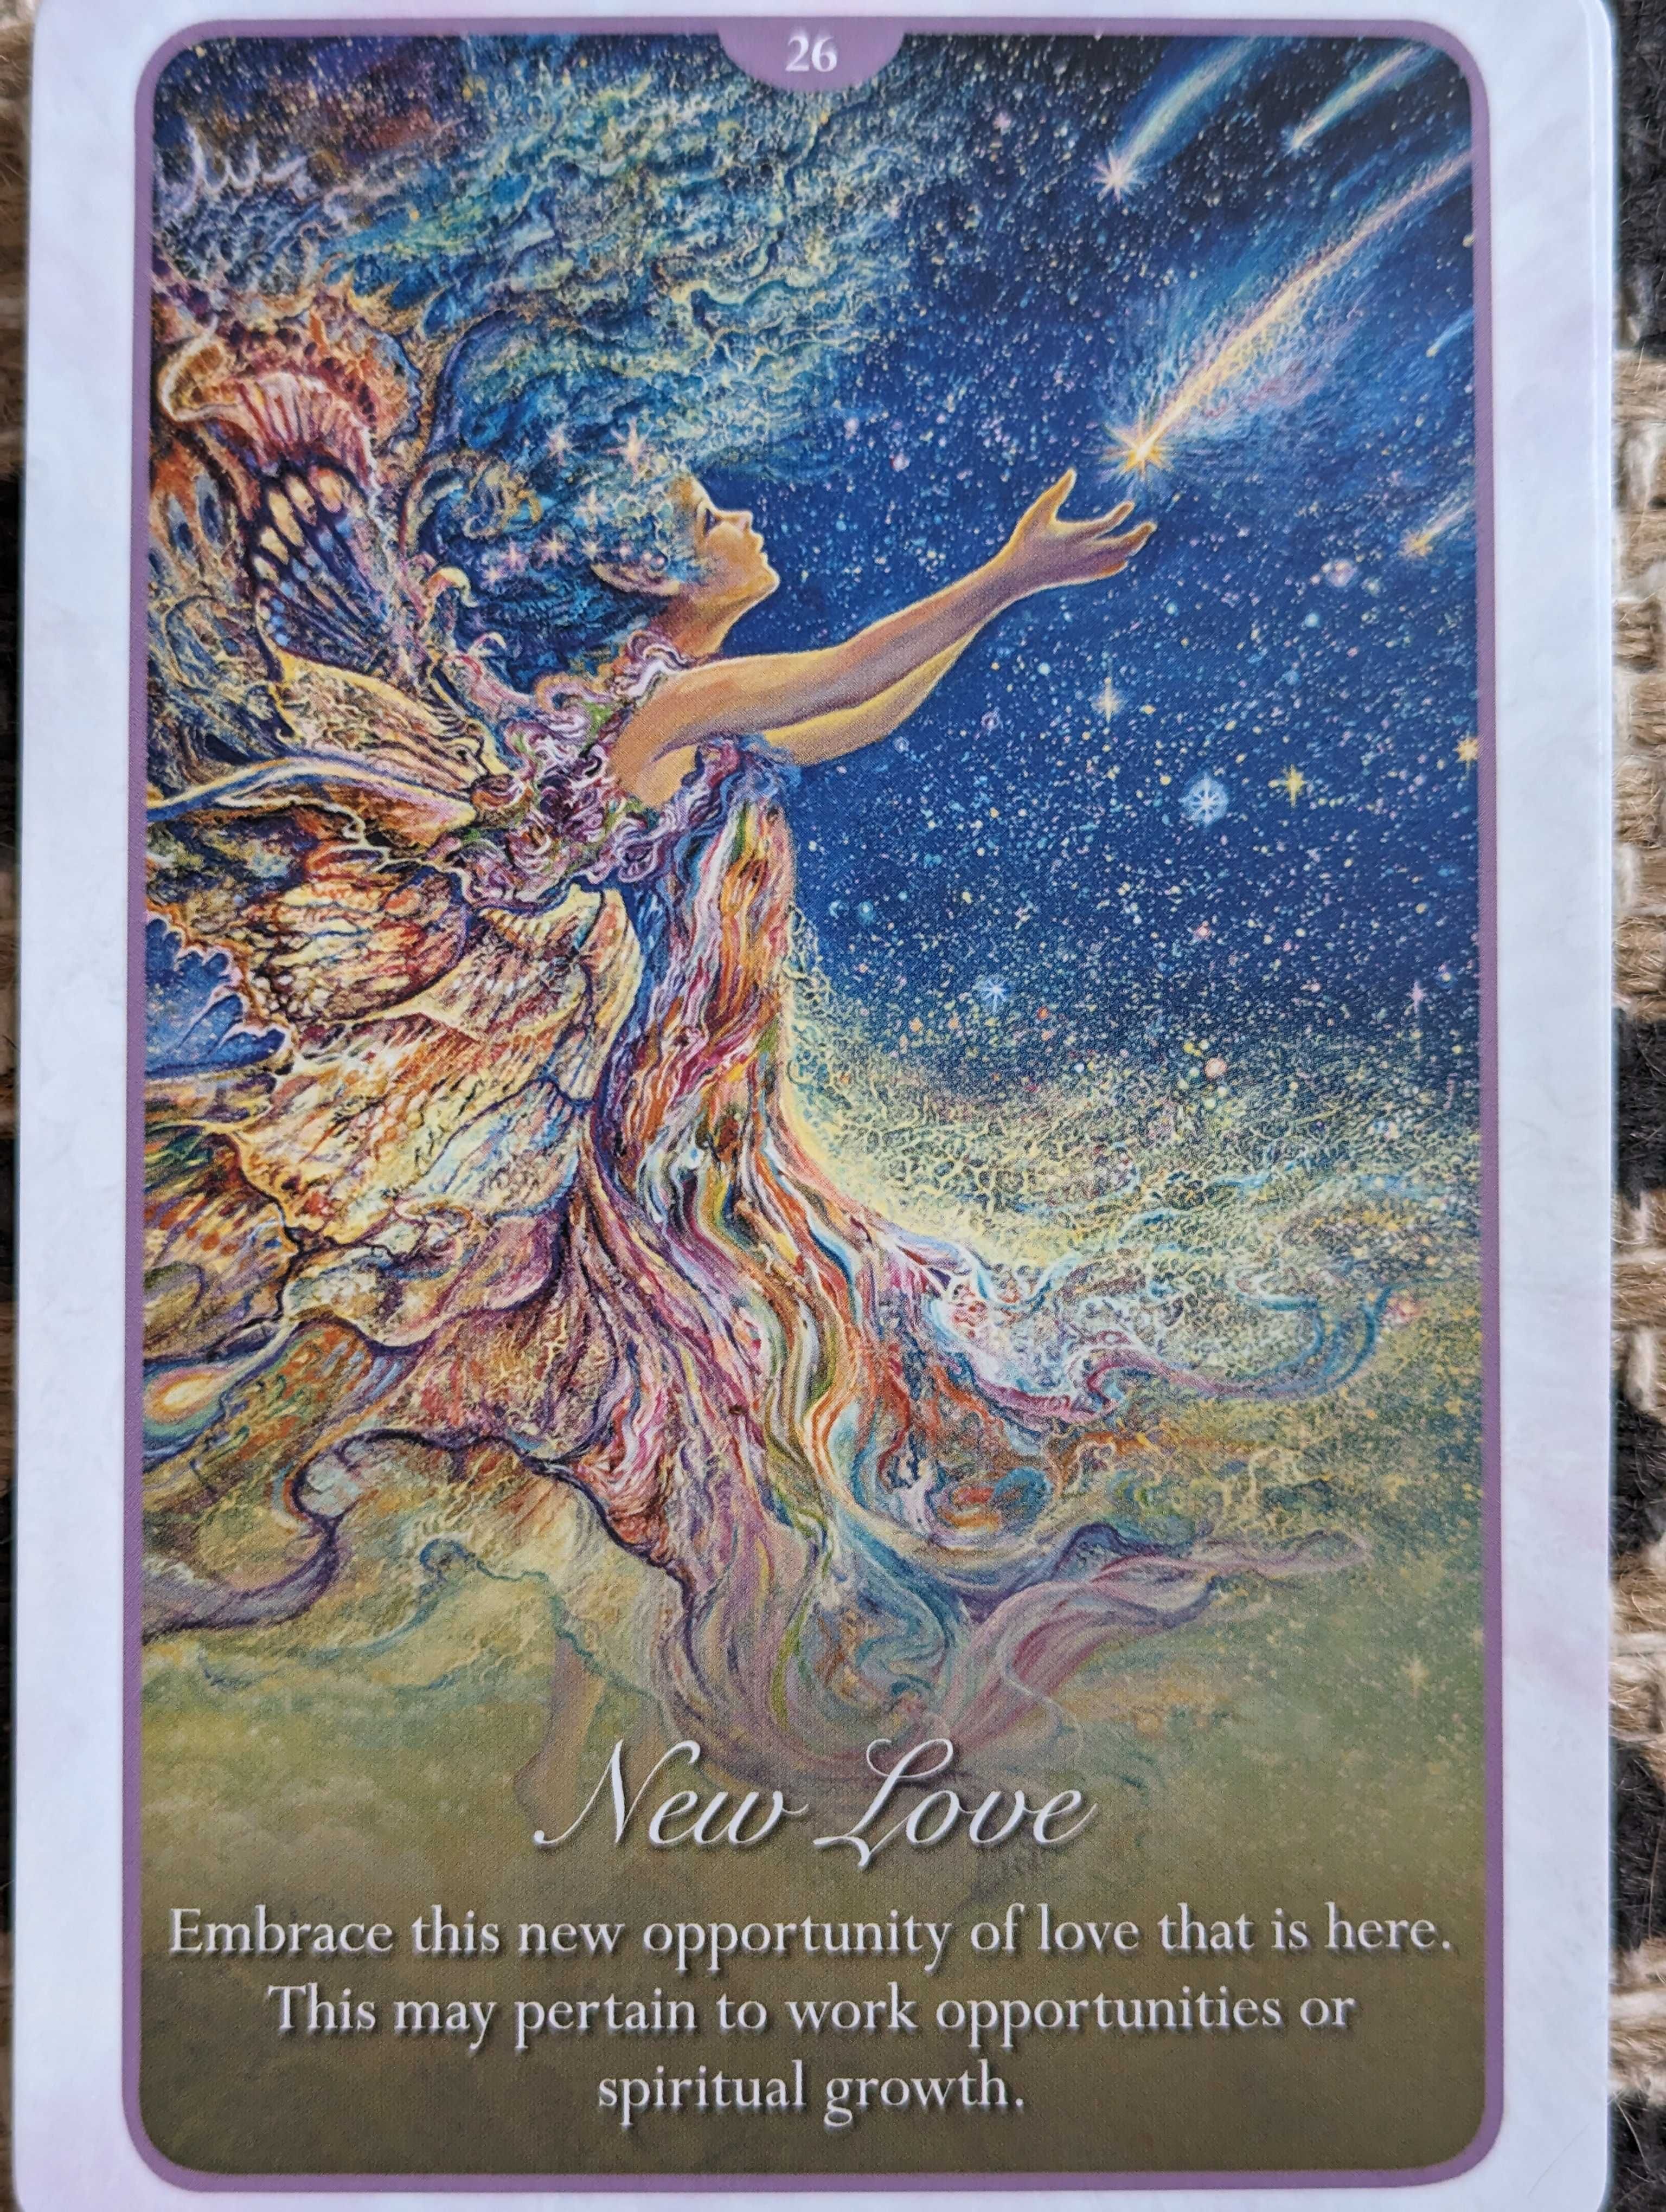 Love oracle cards